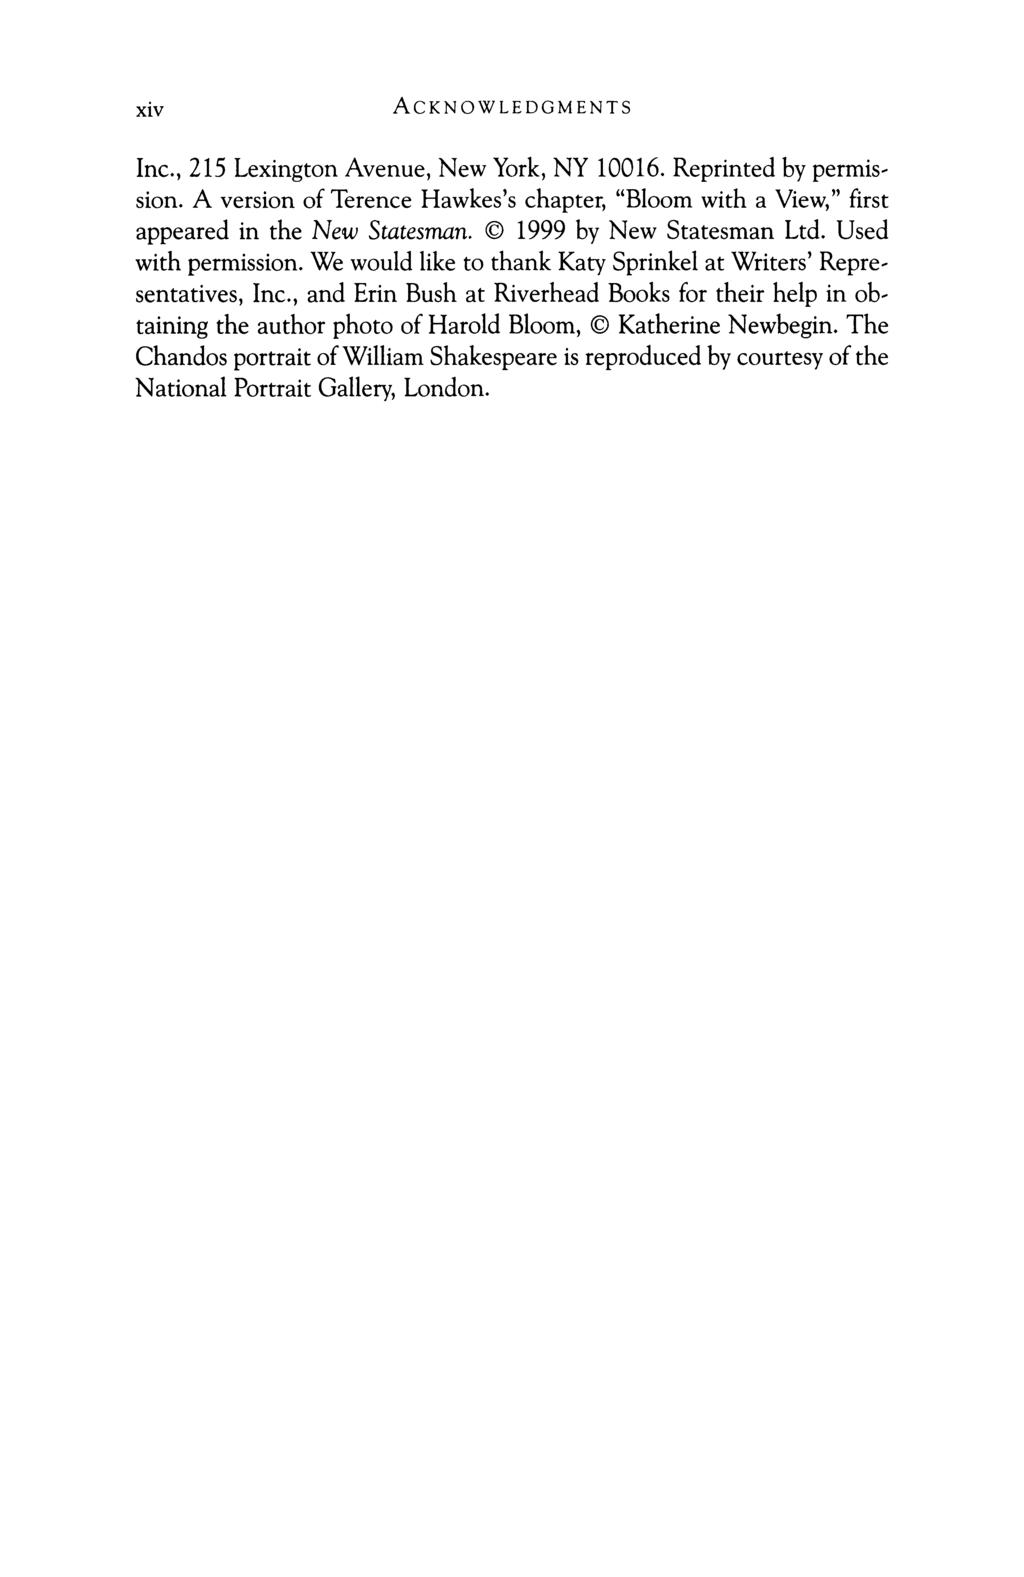 xiv ACKNOWLEDGMENTS Inc., 215 Lexington Avenue, New York, NY 10016. Reprinted by permission. A version of Terence Hawkes's chapter, "Bloom with a View," first appeared in the New Statesman.